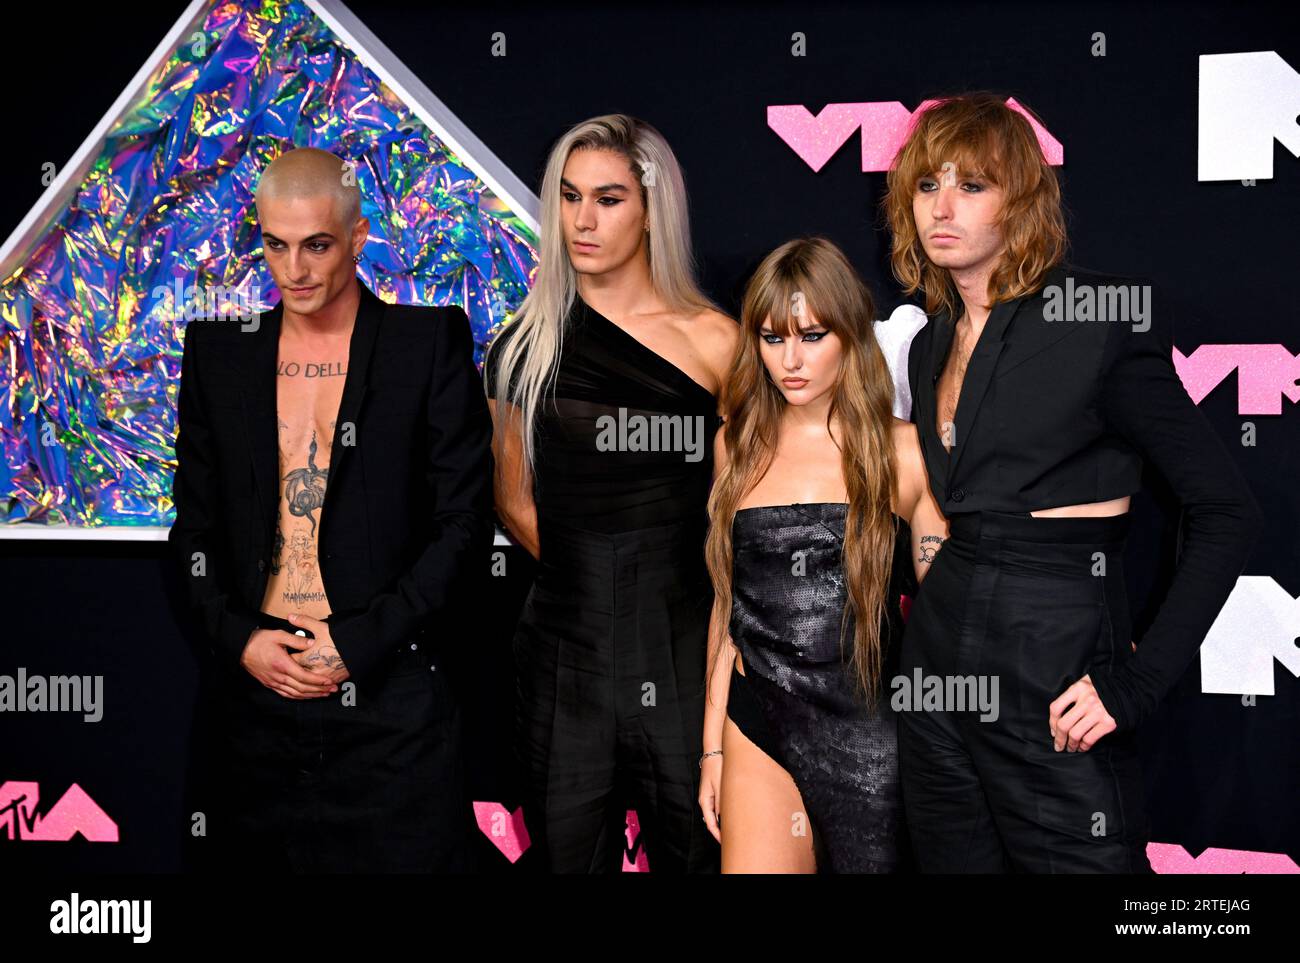 Damiano David, Ethan Torchio, Victoria De Angelis and Thomas Raggi of Maneskin attending the MTV Video Music Awards 2023 held at the Prudential Center in Newark, New Jersey. Picture date: Tuesday September 12, 2023. Stock Photo